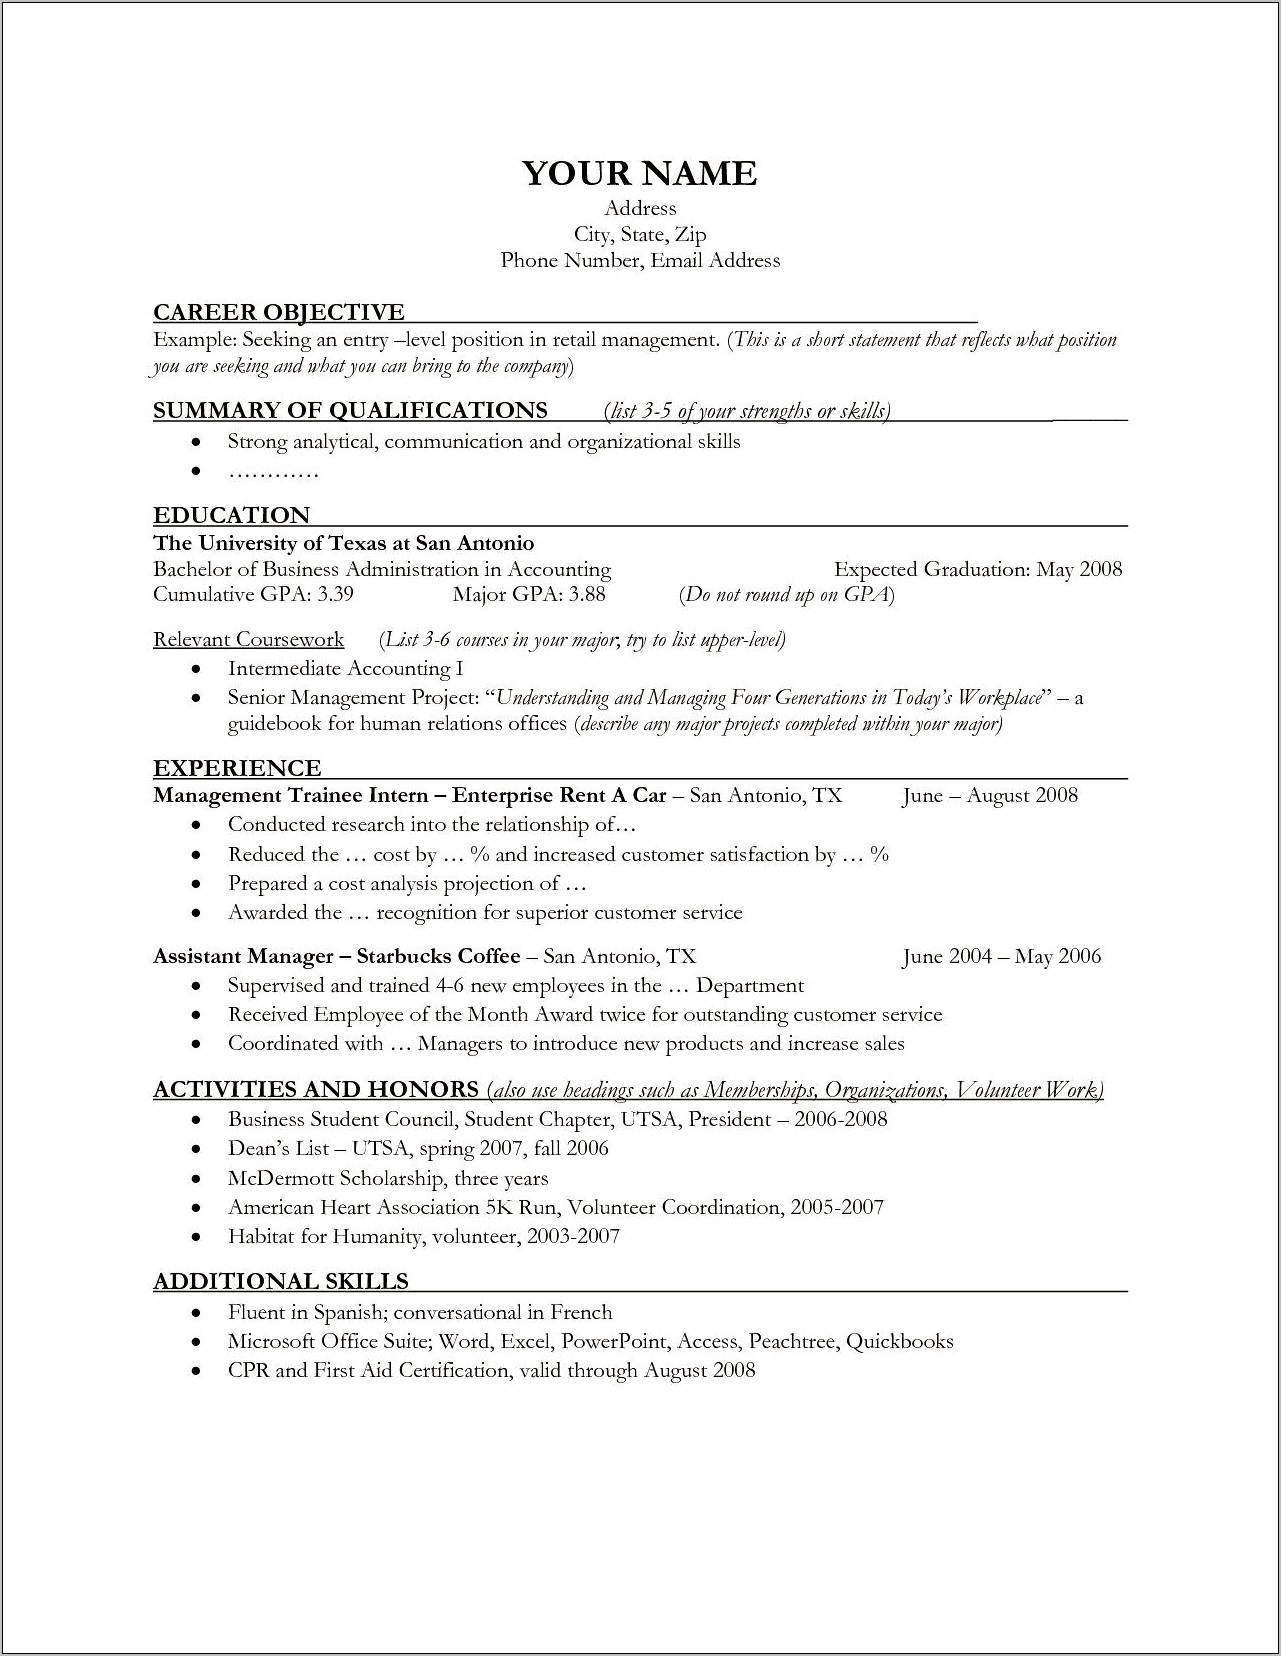 Resume Objective For An Entry Level Position